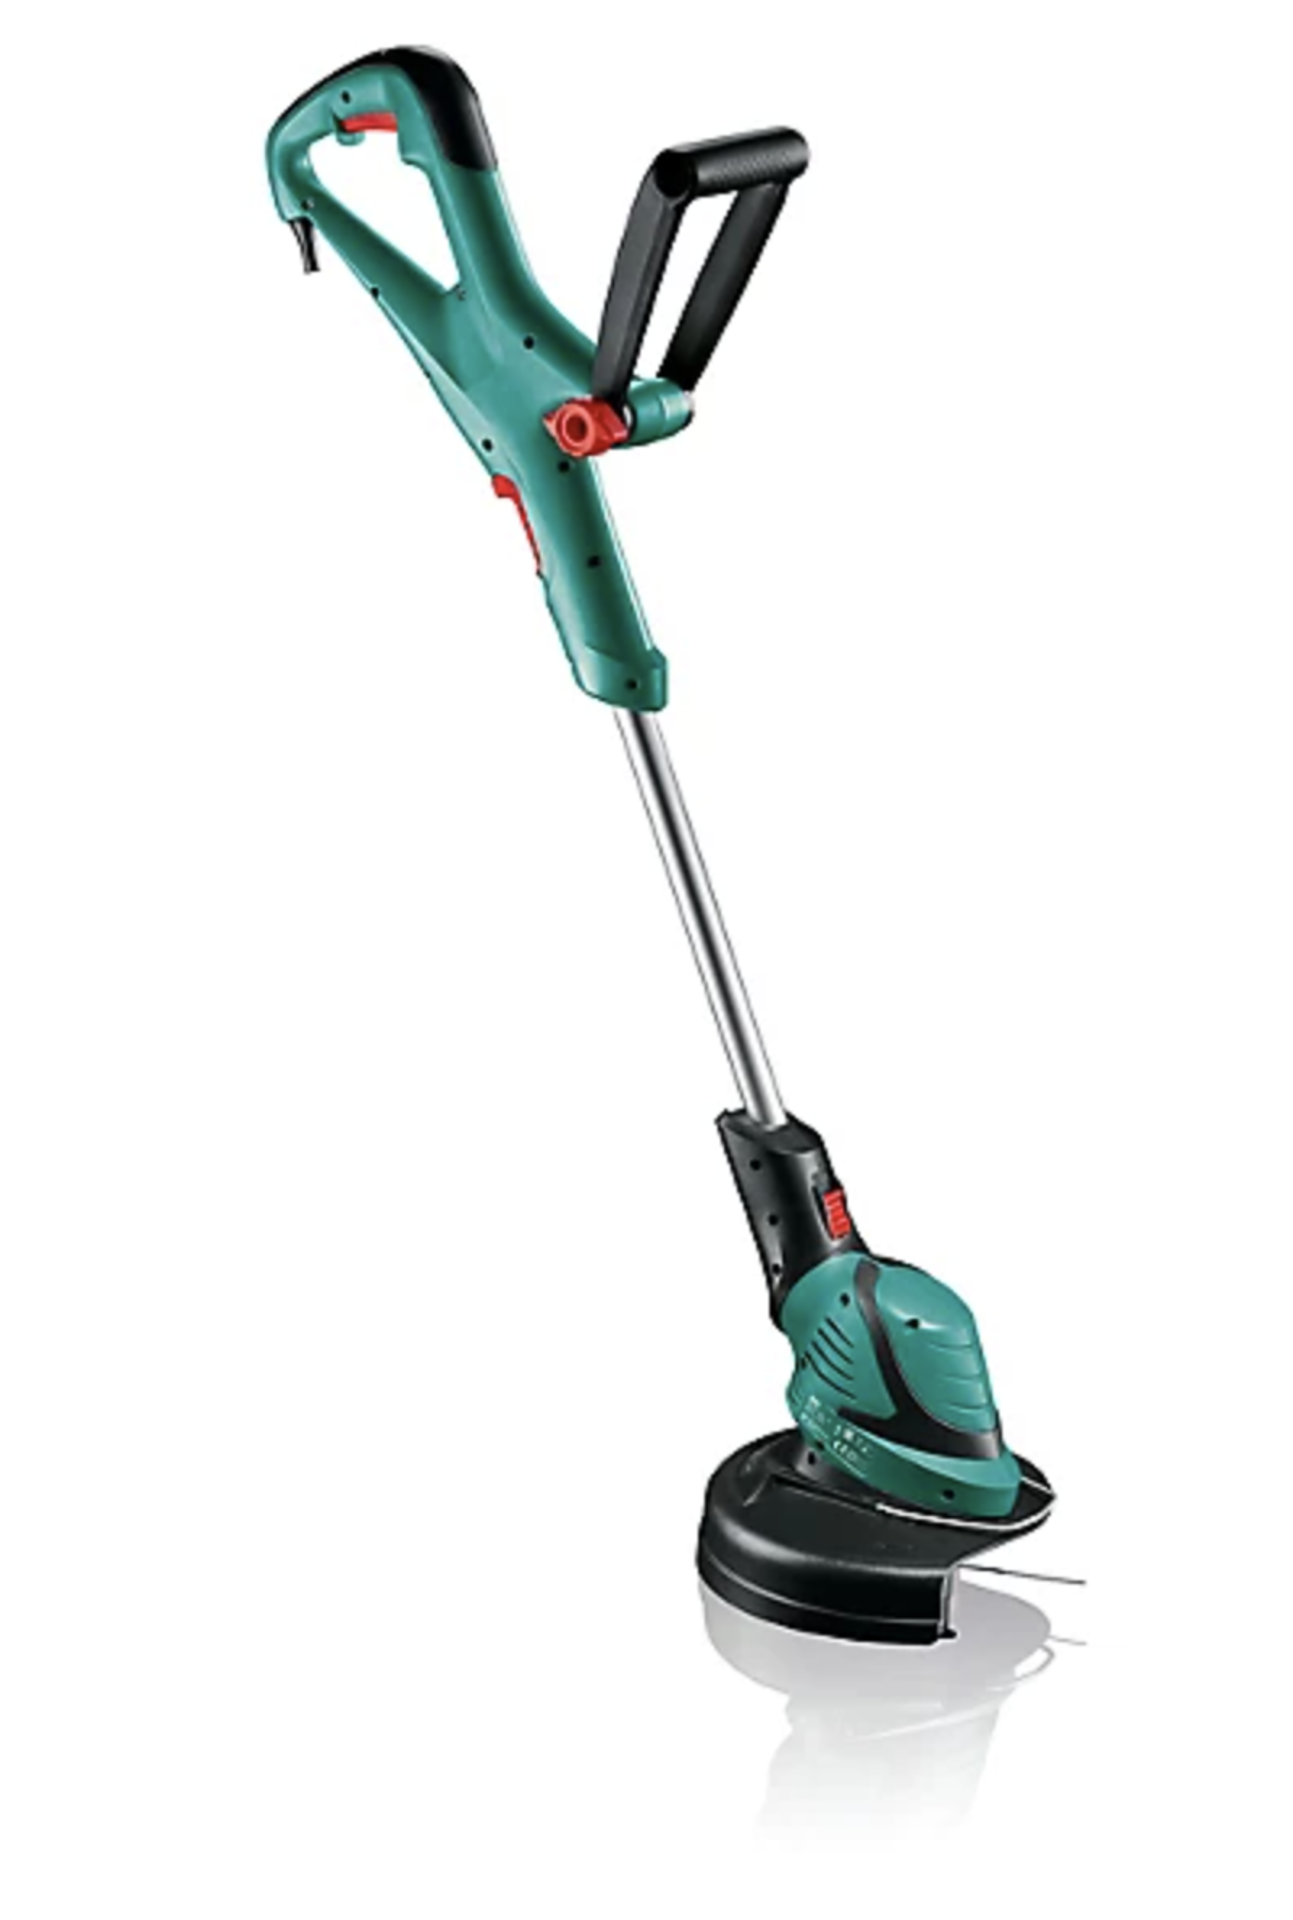 BOSCH ART 27 CORDED GRASS TRIMMER RRP £52Condition ReportAppraisal Available on Request- All Items